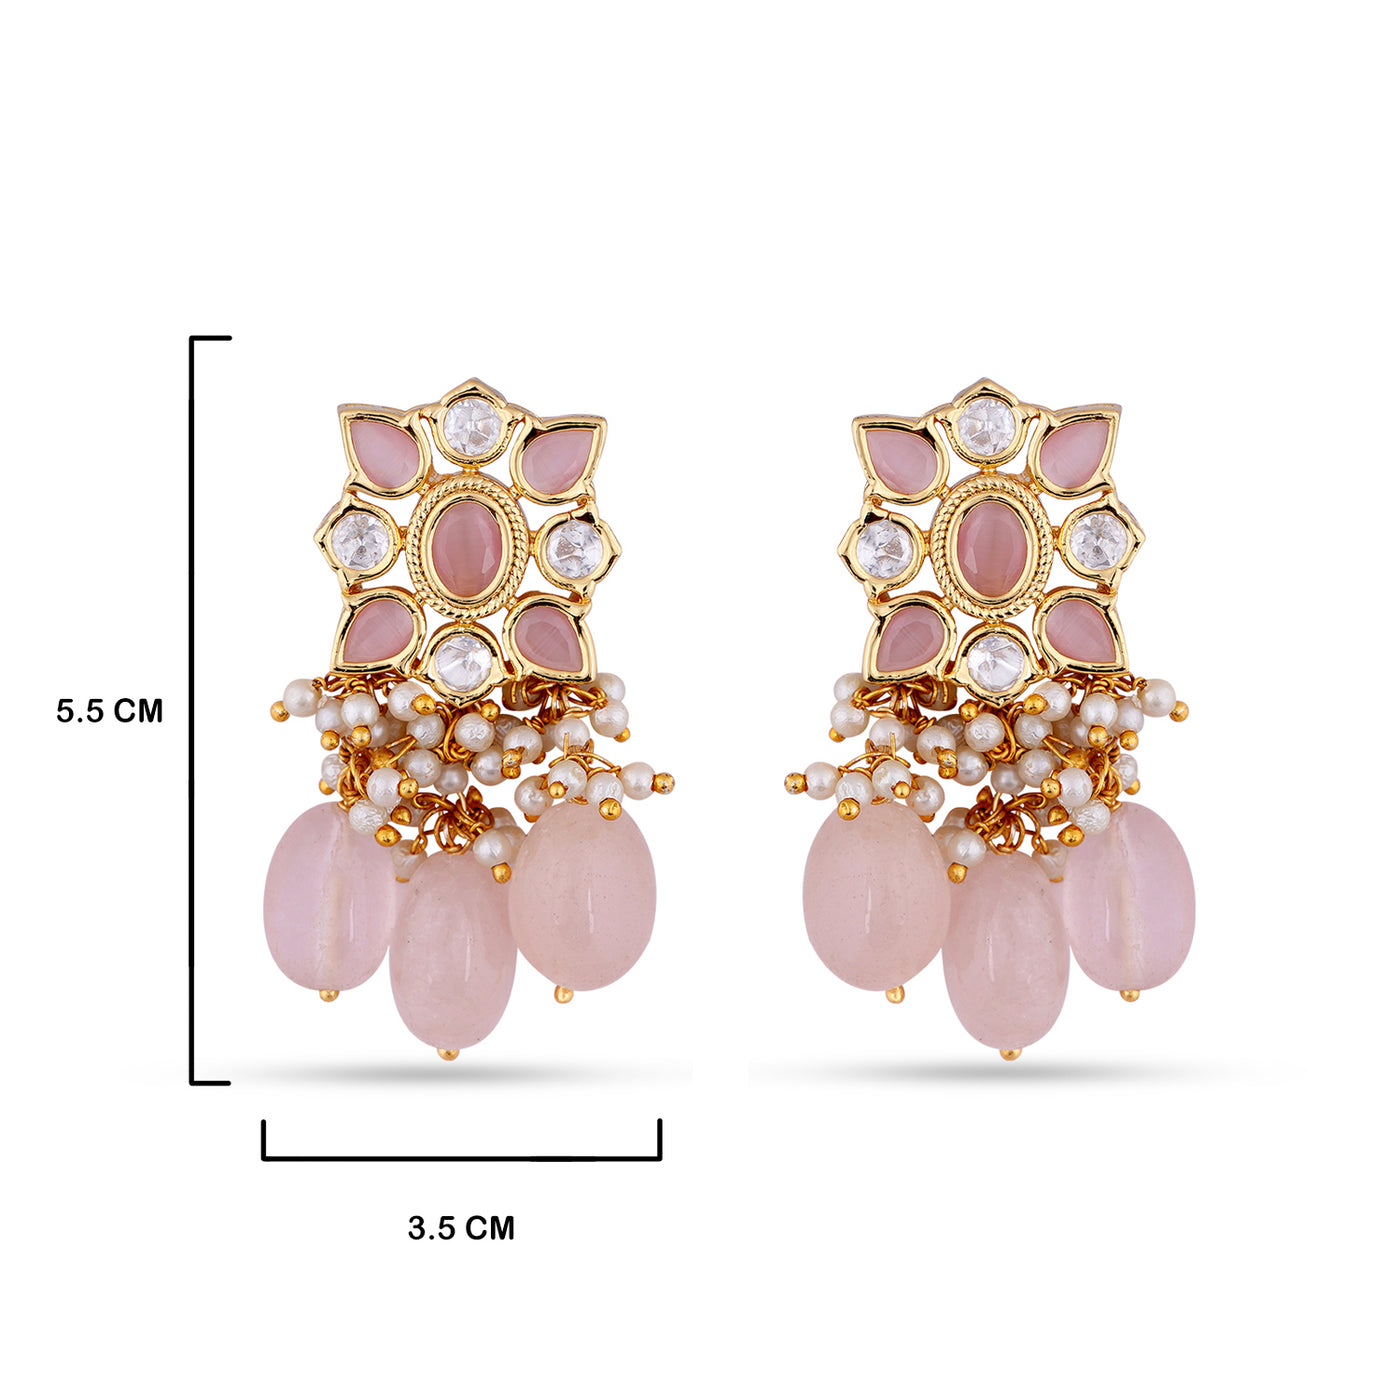 Pink Stone Earrings with measurements in cm. 5.5cm and 3.5cm.